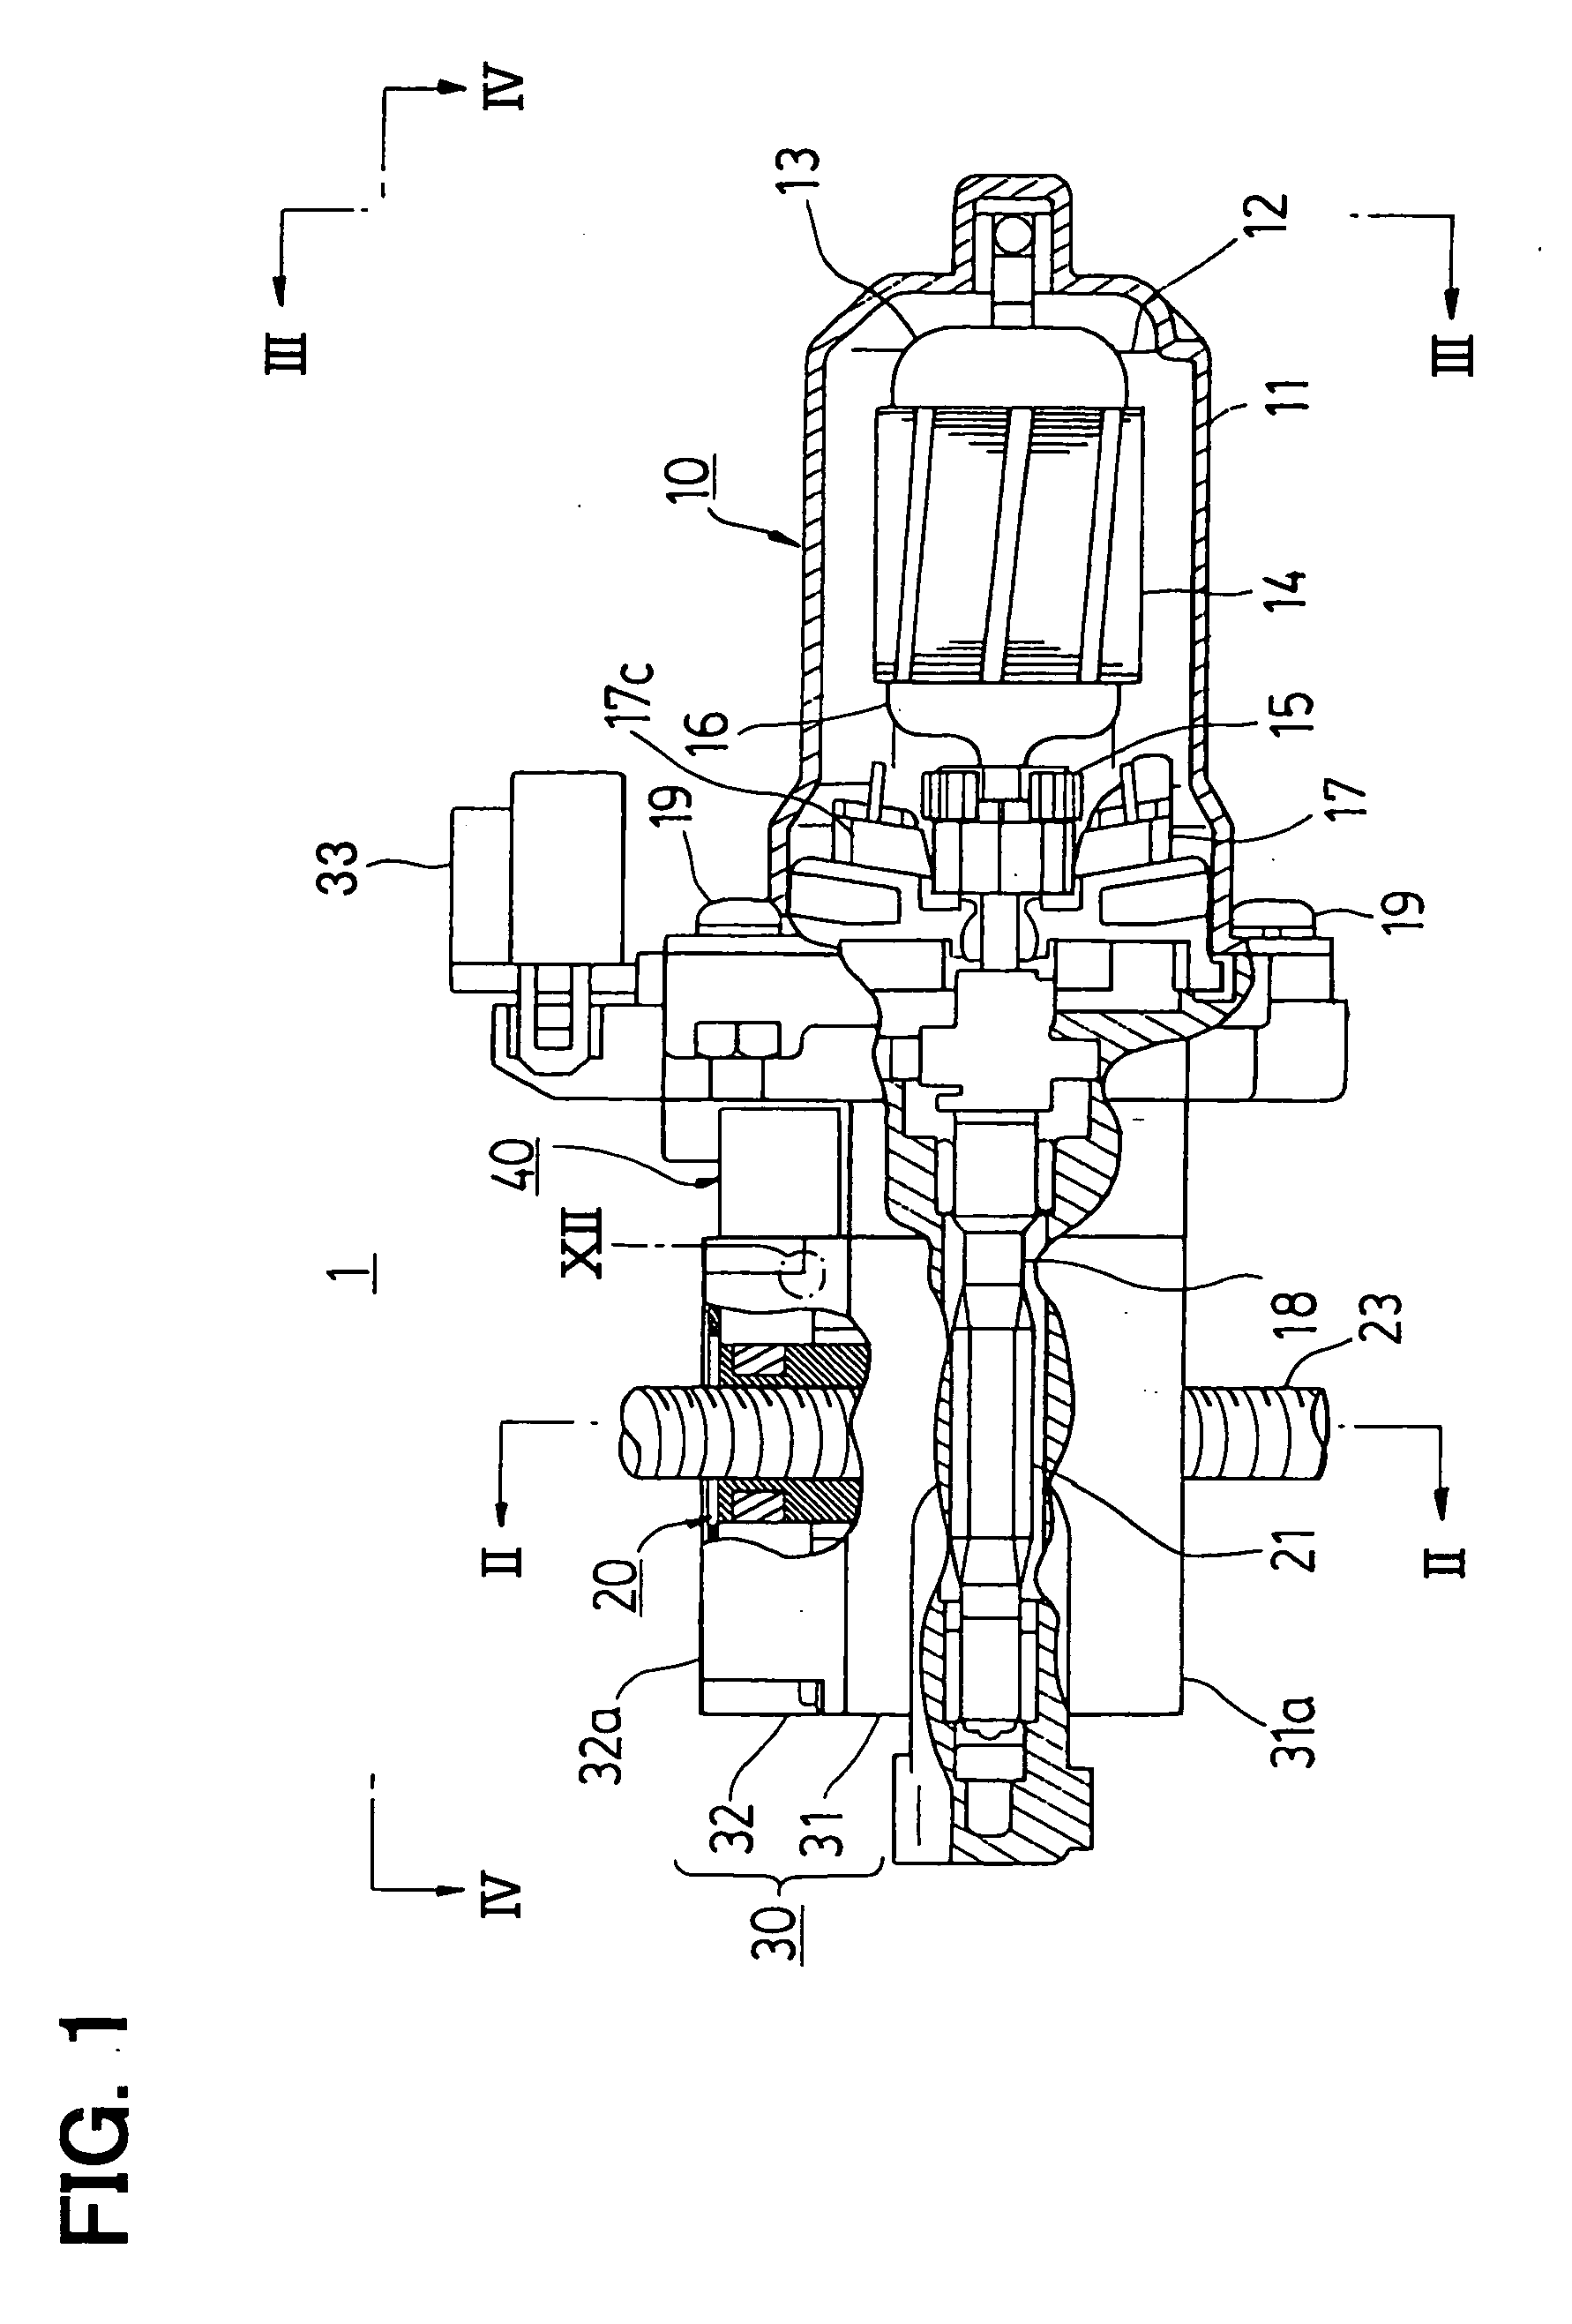 Seat drive motor and power seat system